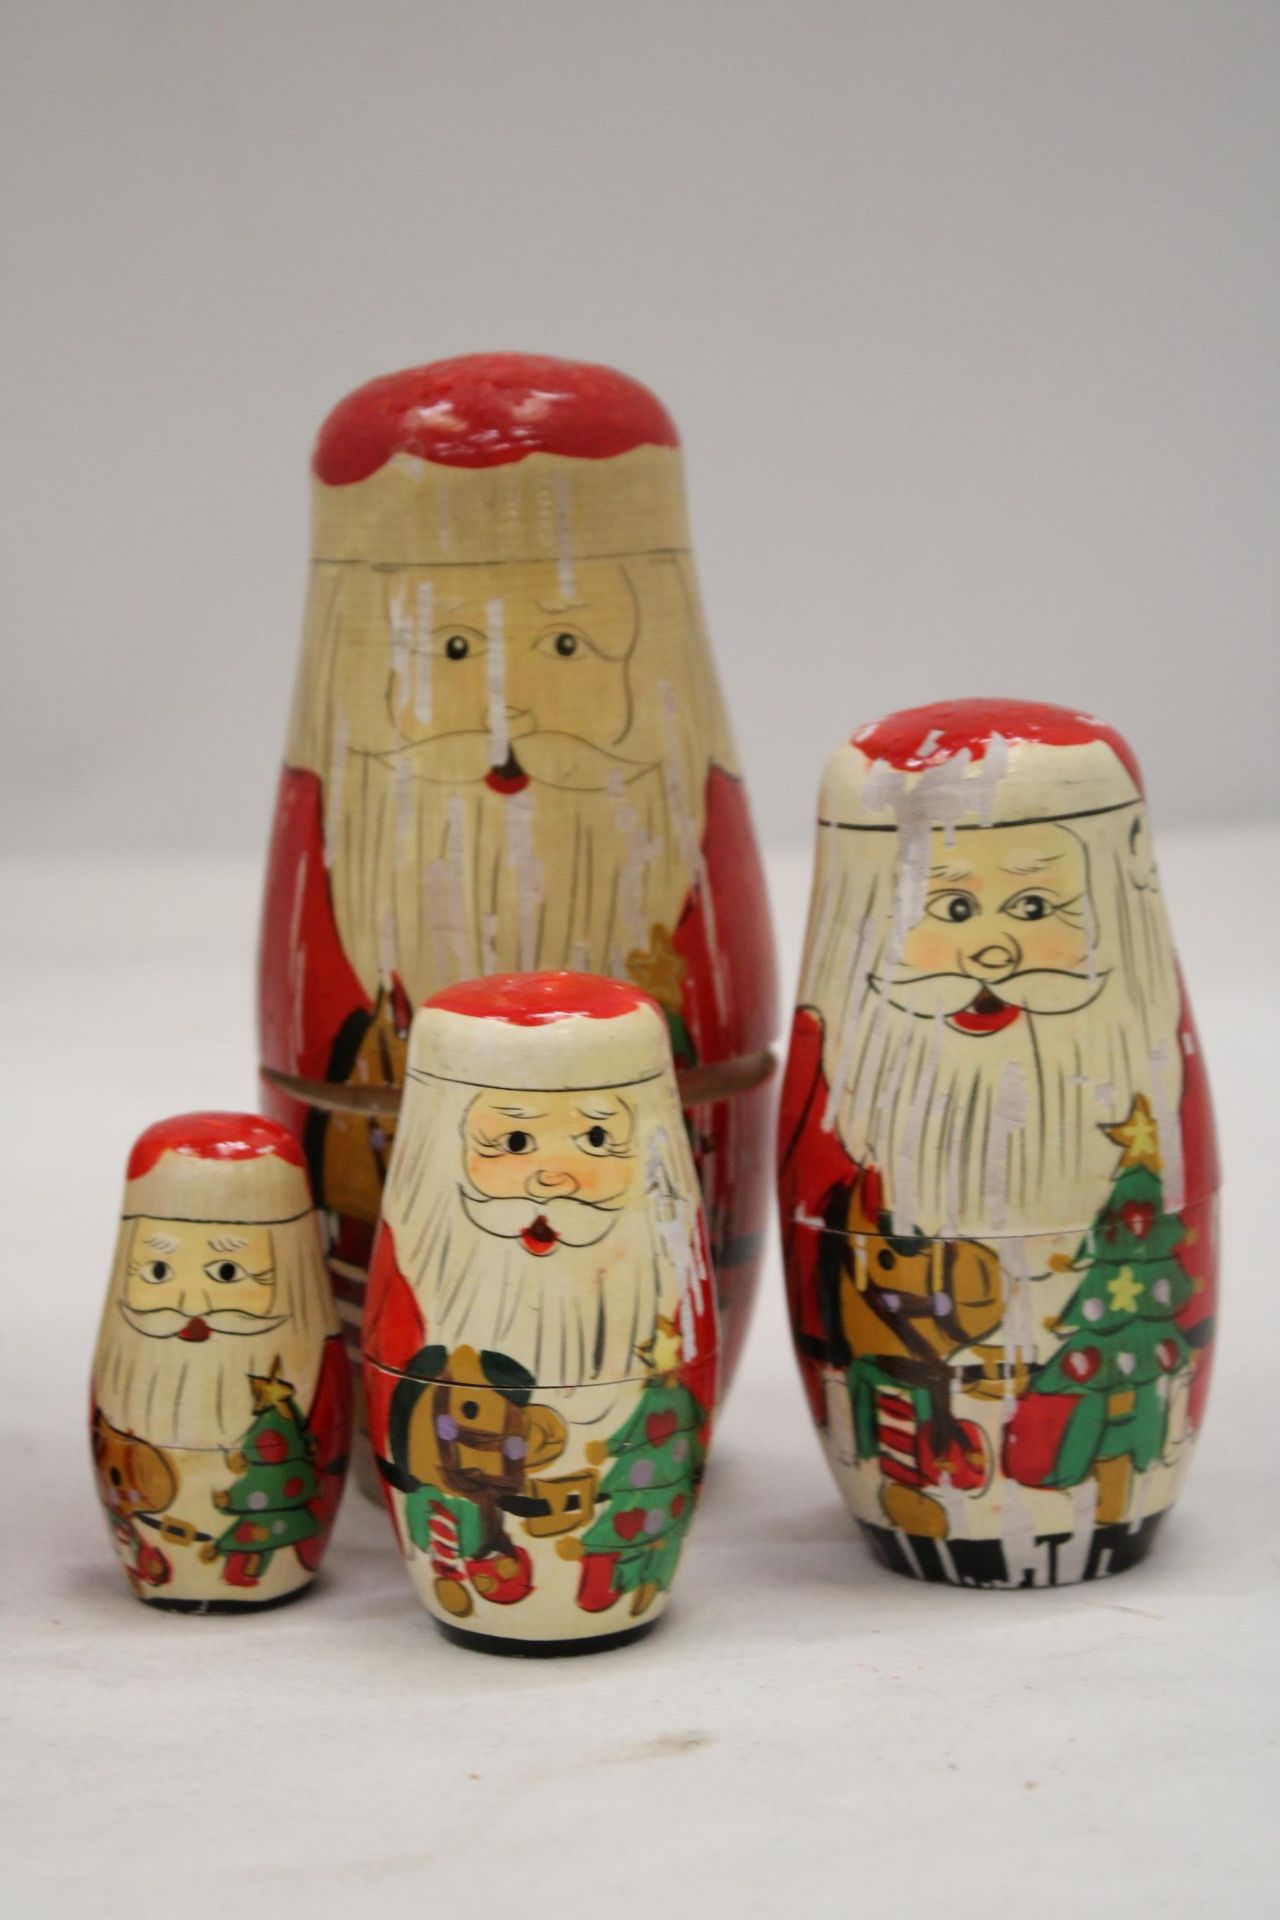 A RUSSIAN NESTING DOLL AND FATHER CHRISTMAS - Image 4 of 5